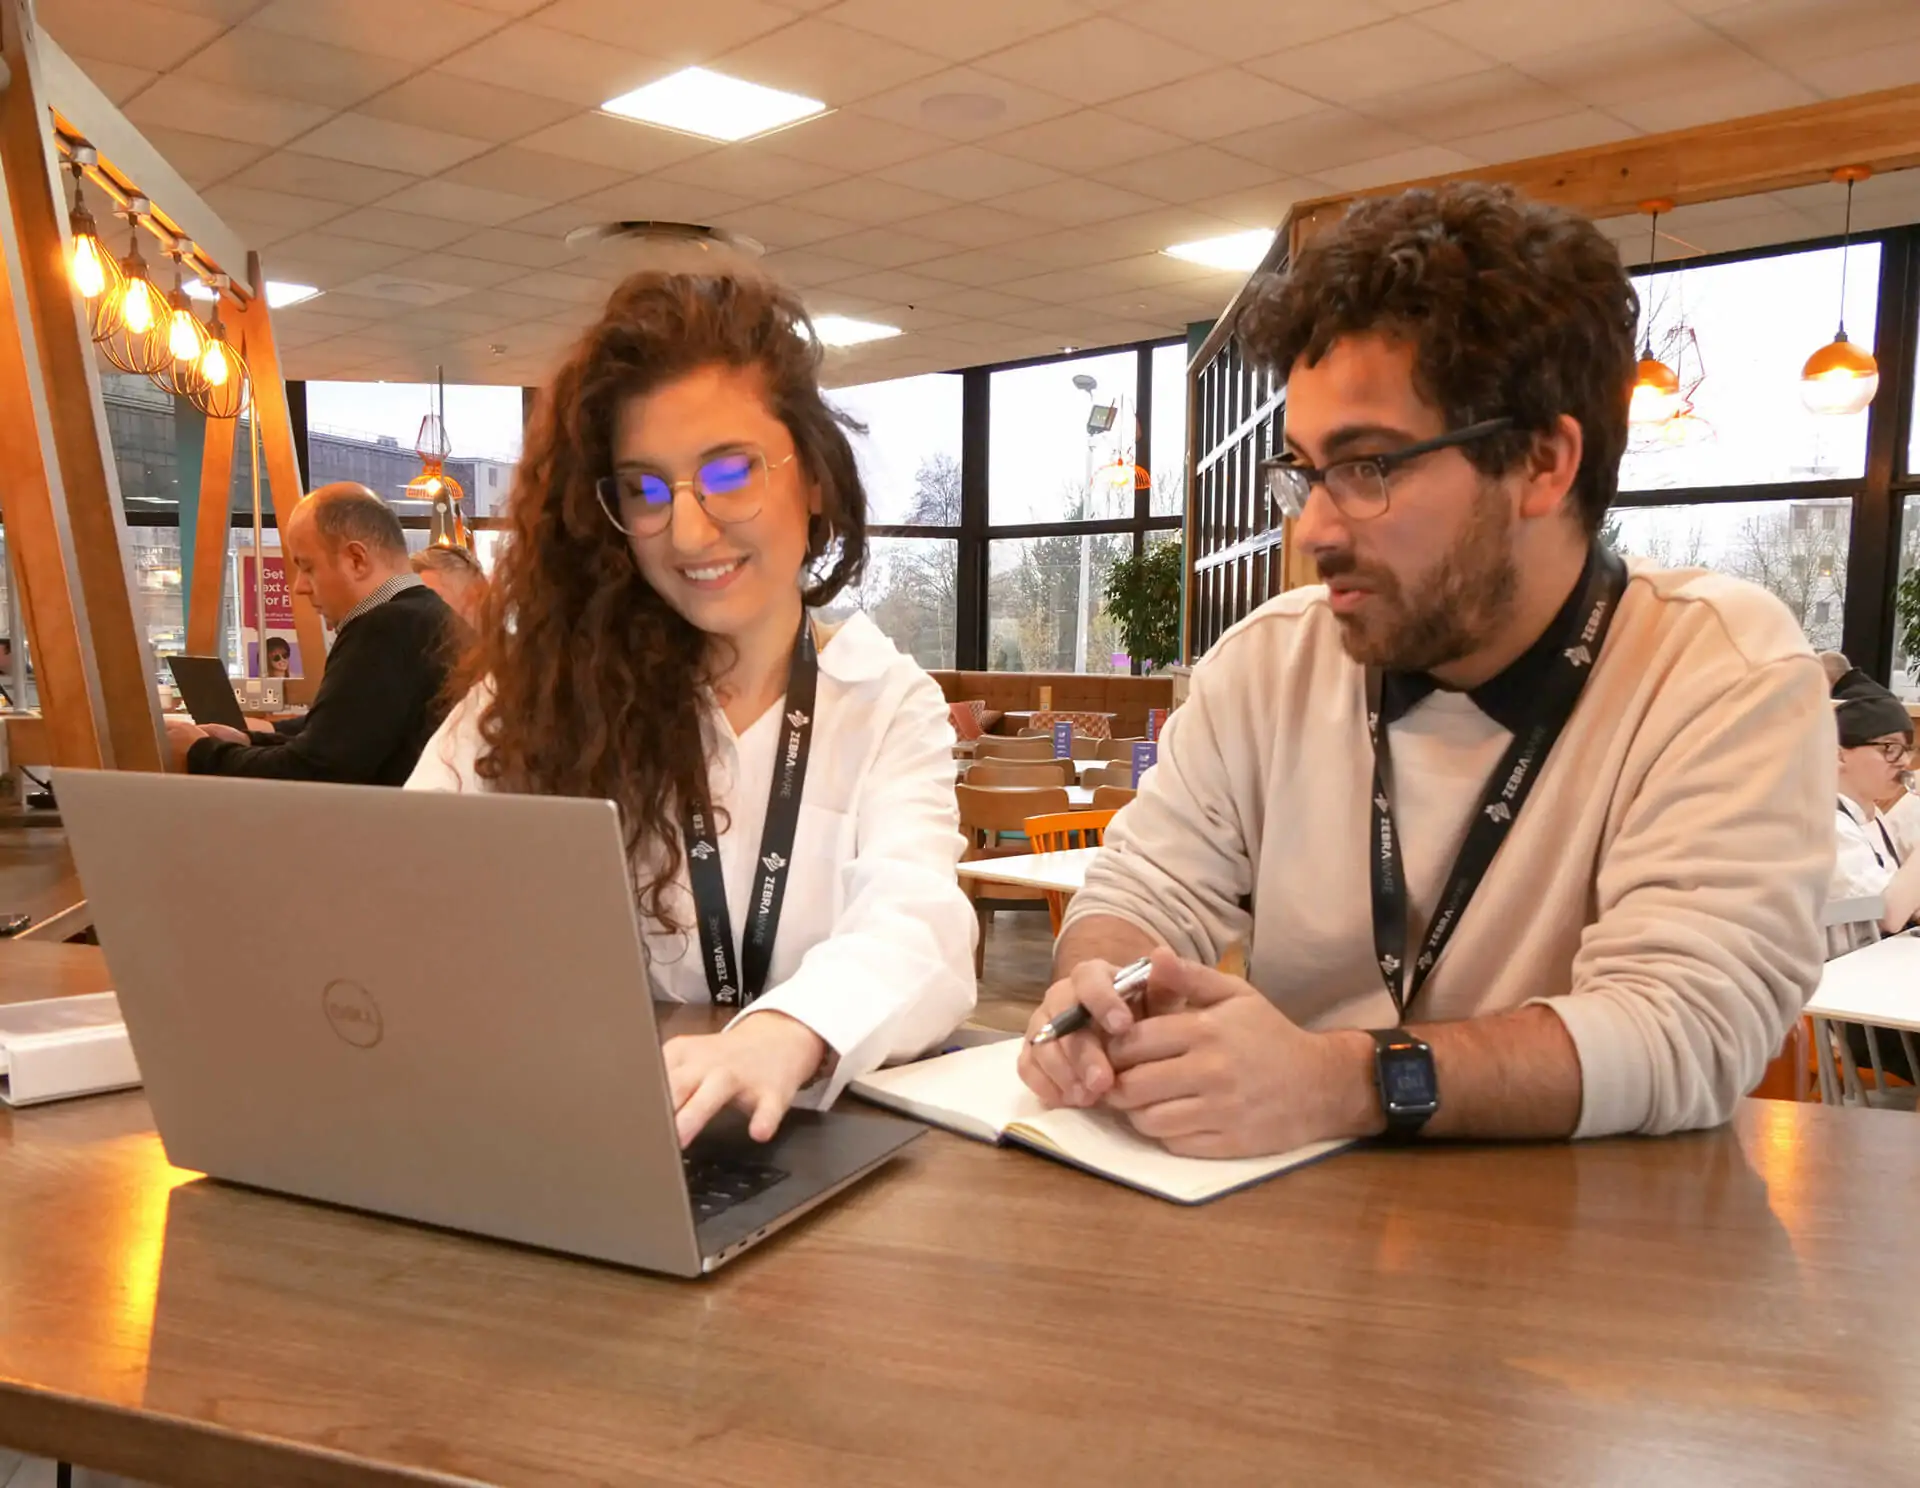 Zebraware Staff at a cafe collaborating over a laptop